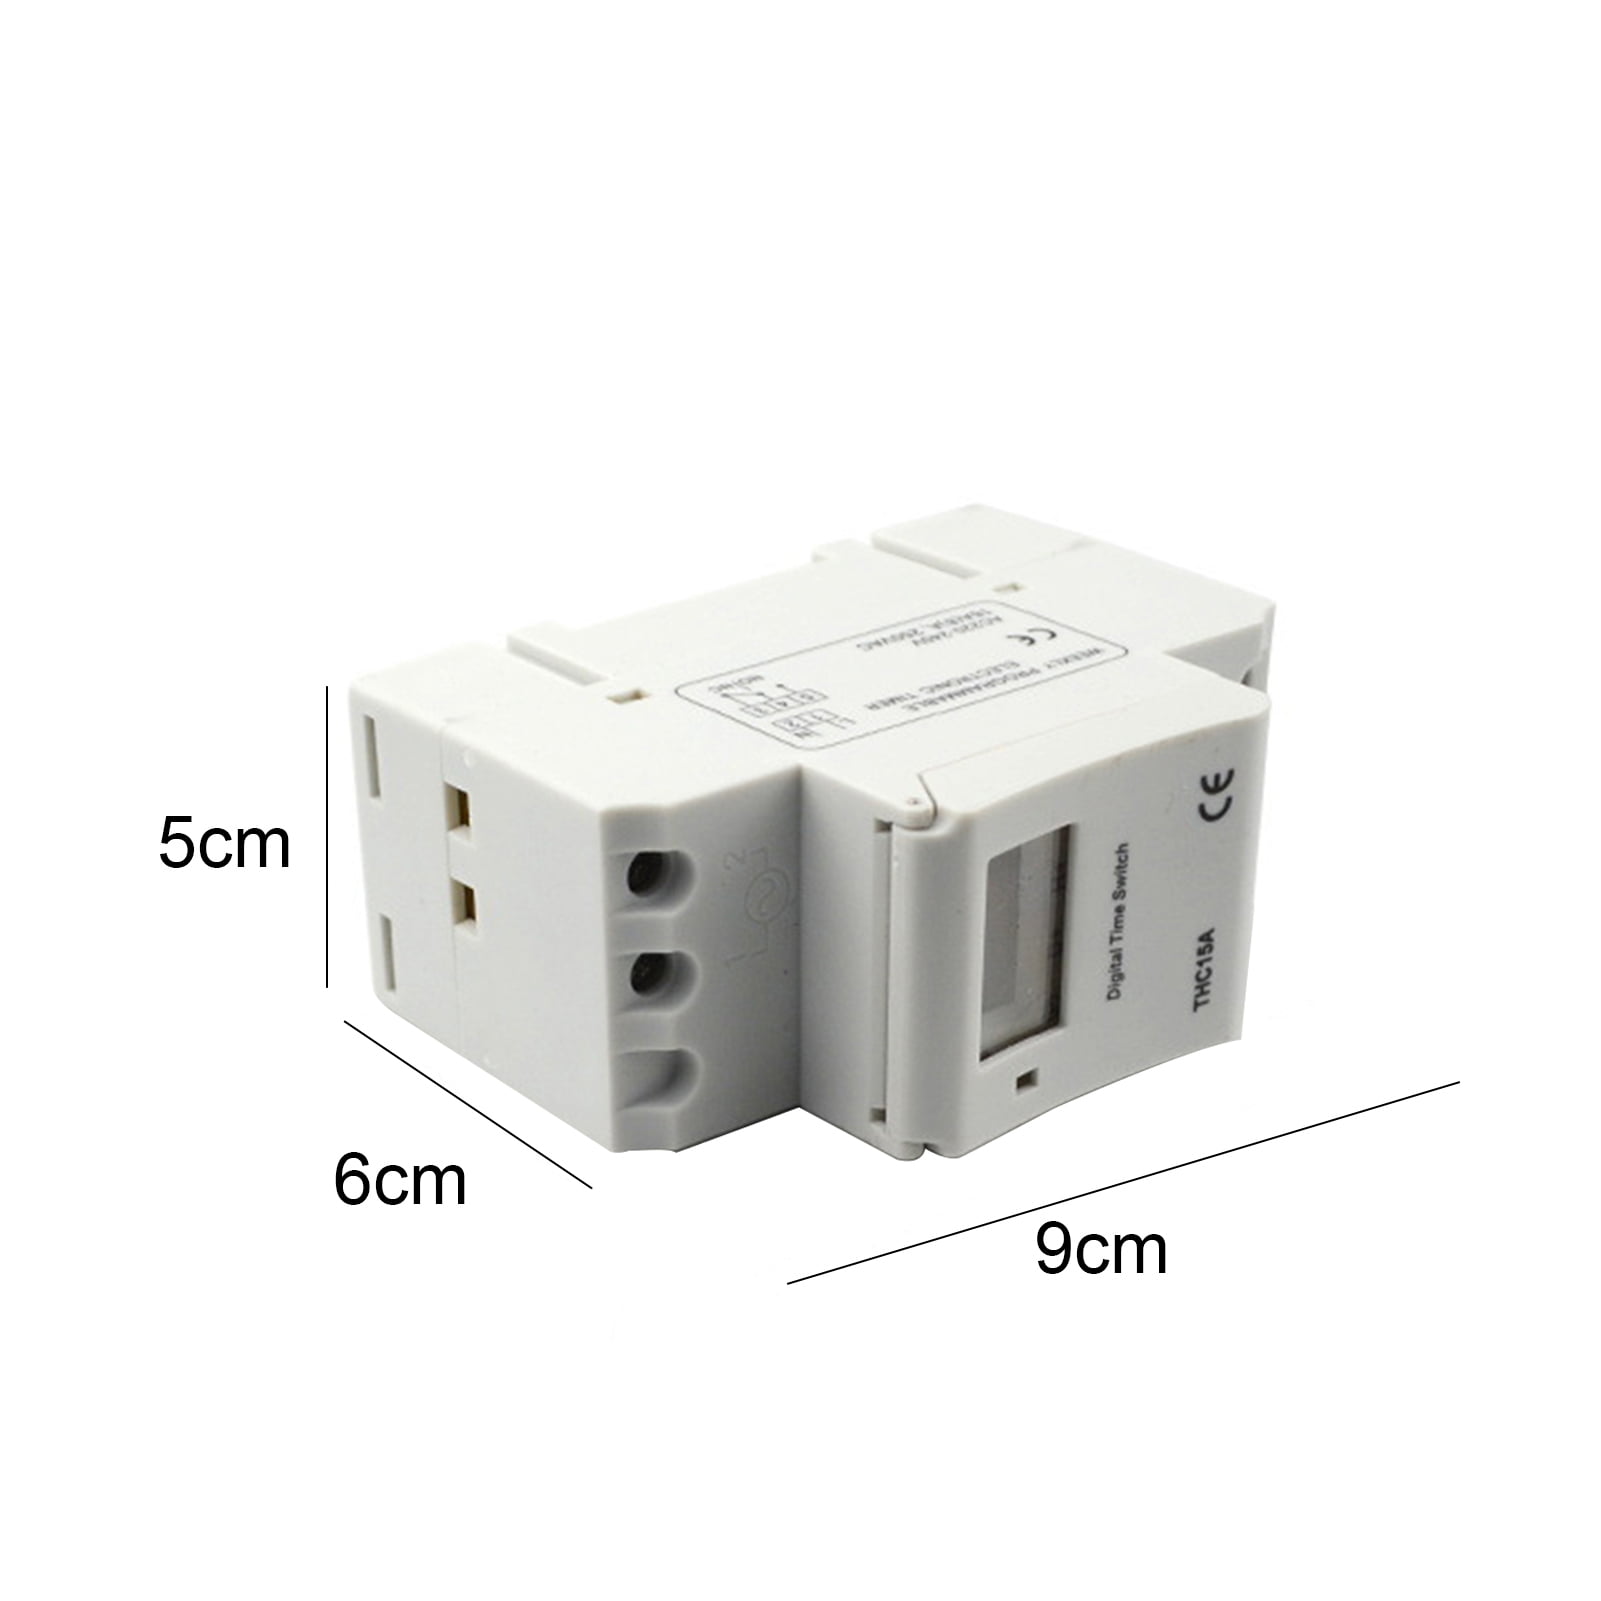 THC15A 110 VOLT DIN RAIL MOUNTED DIGITAL TIMER TIMESWITCH 7 DAY 24 HOUR HEATING 